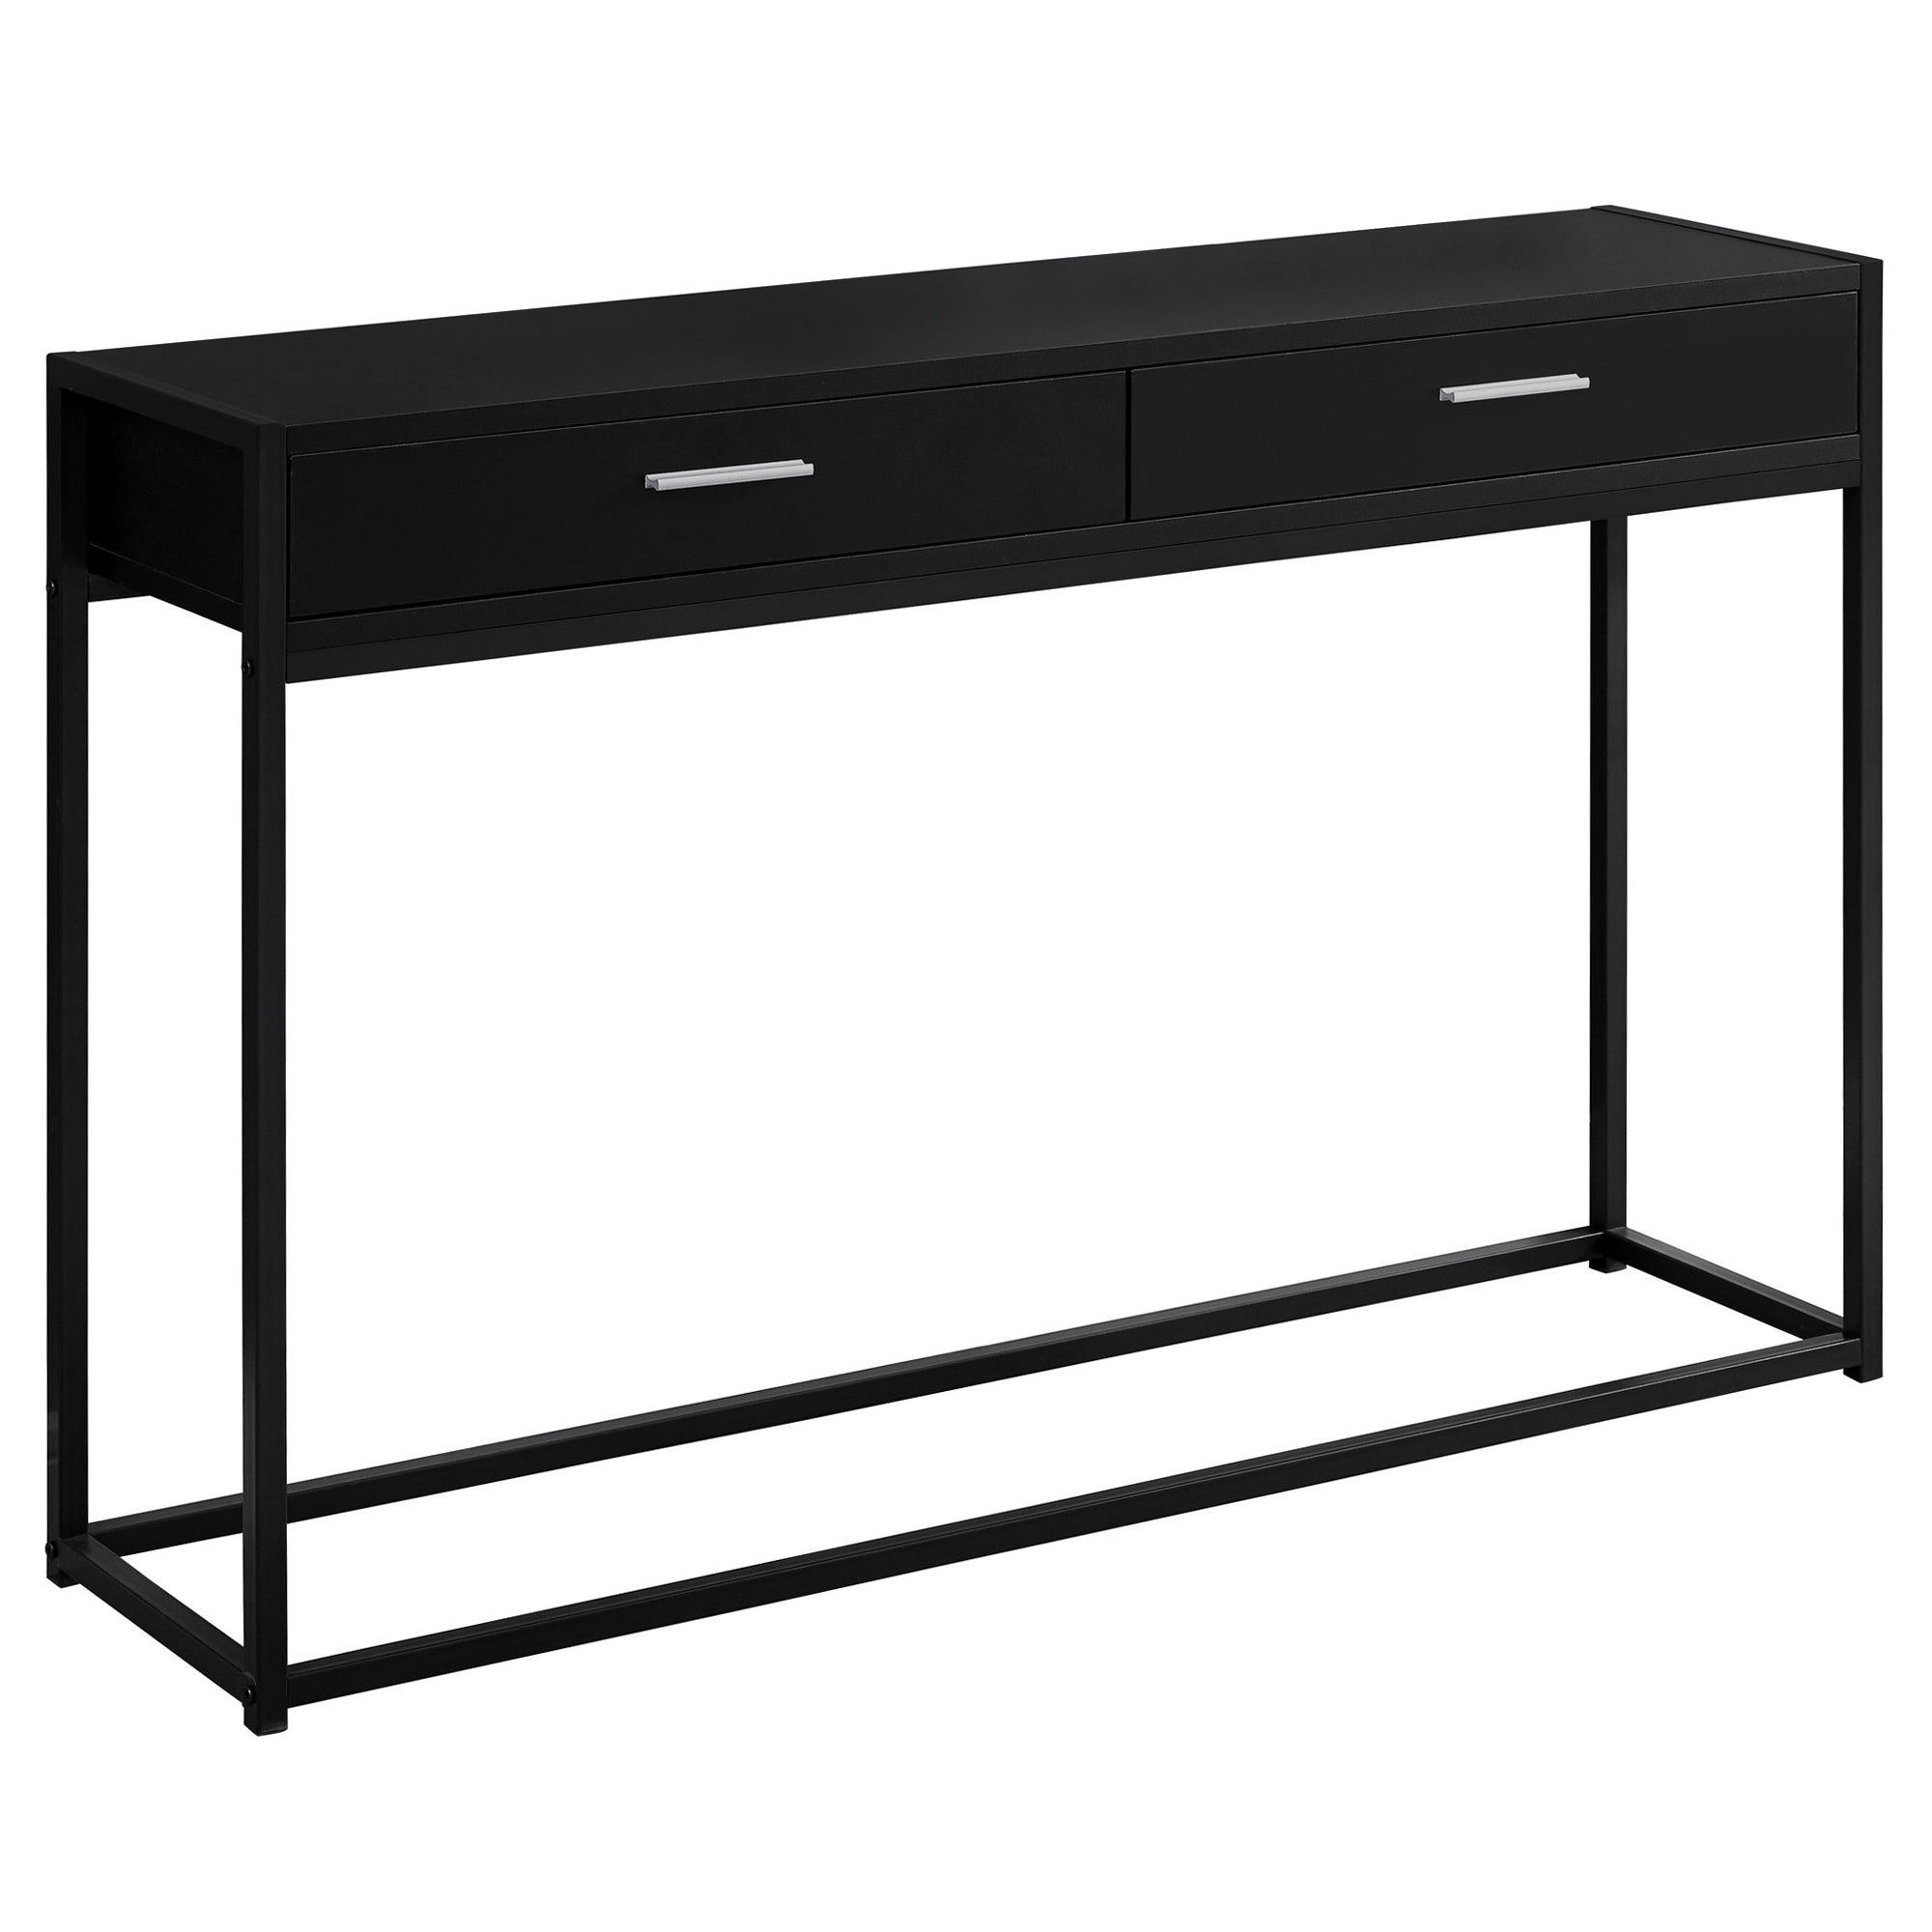 48" Gray And Black Frame Console Table